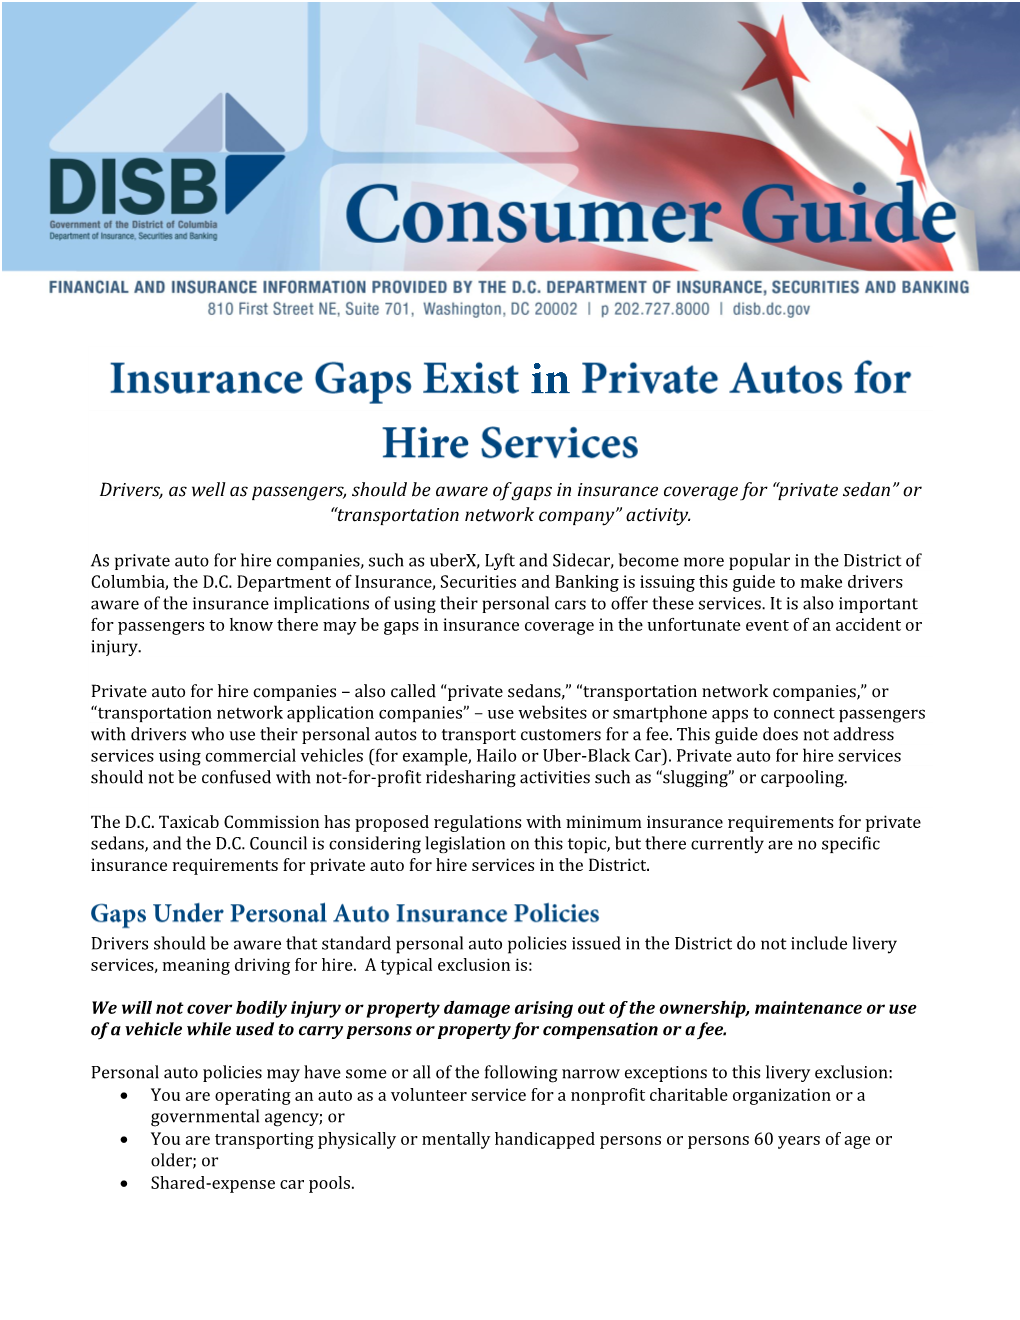 Drivers, As Well As Passengers, Should Be Aware of Gaps in Insurance Coverage for “Private Sedan” Or “Transportation Network Company” Activity